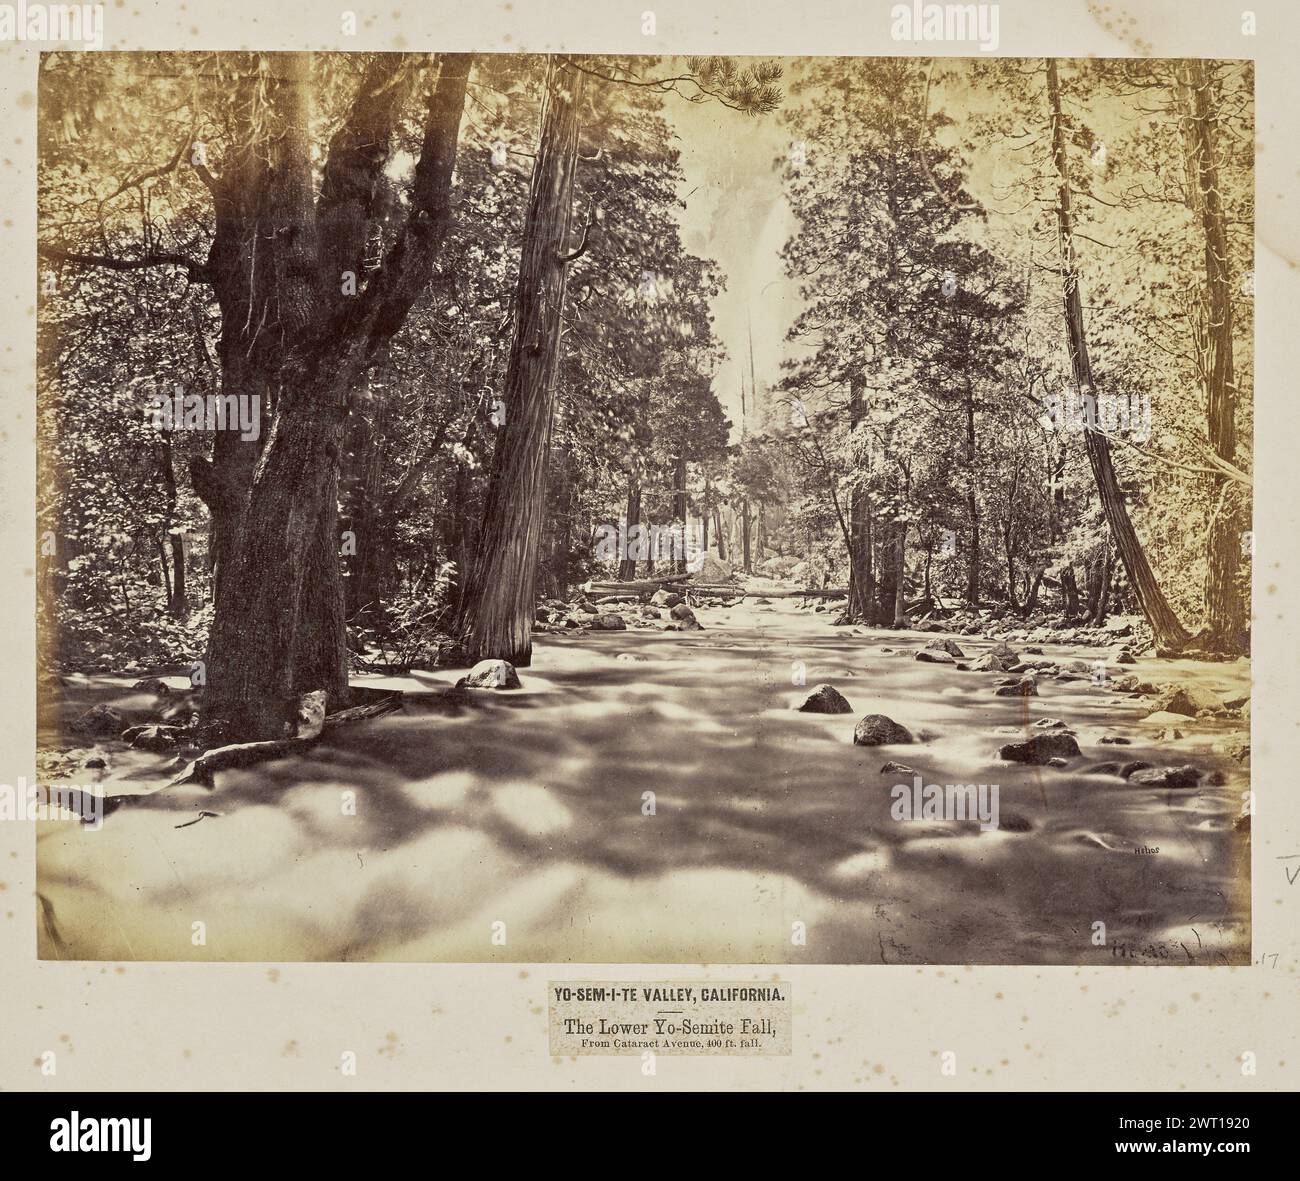 Yo-Sem-i-te Valley, California. The Lower Yo-Semite Fall, from Cataract Avenue, 400 Feet Fall. Eadweard J. Muybridge, photographer (American, born England, 1830 - 1904) negative 1867, print later View of a stream lined with tall trees, looking toward a waterfall in the background. This view is seen from a vantage point in the middle of the stream, possibly from a bridge. A tree trunk bridge spanning across the stream can also be seen further away toward the background. (Recto, mount) center left, next to image, in pencil: 'B&R [sideways] / 4036 [sideways]'; Center, below image, printed on labe Stock Photo